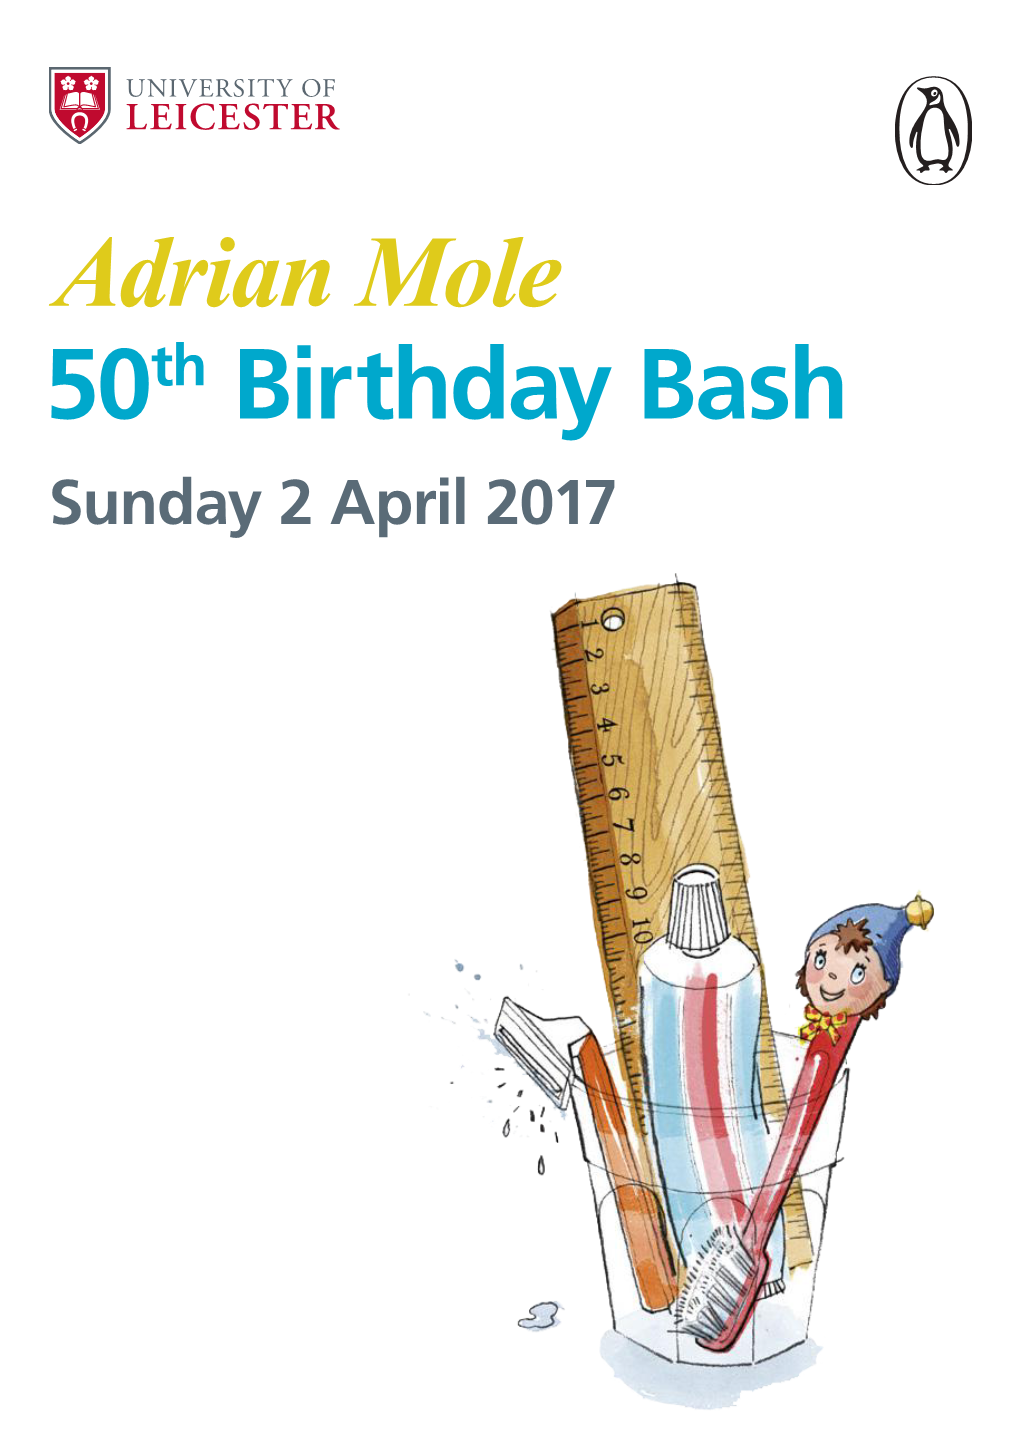 Adrian Mole 50Th Birthday Bash Sunday 2 April 2017 Programme for the Day Introduction